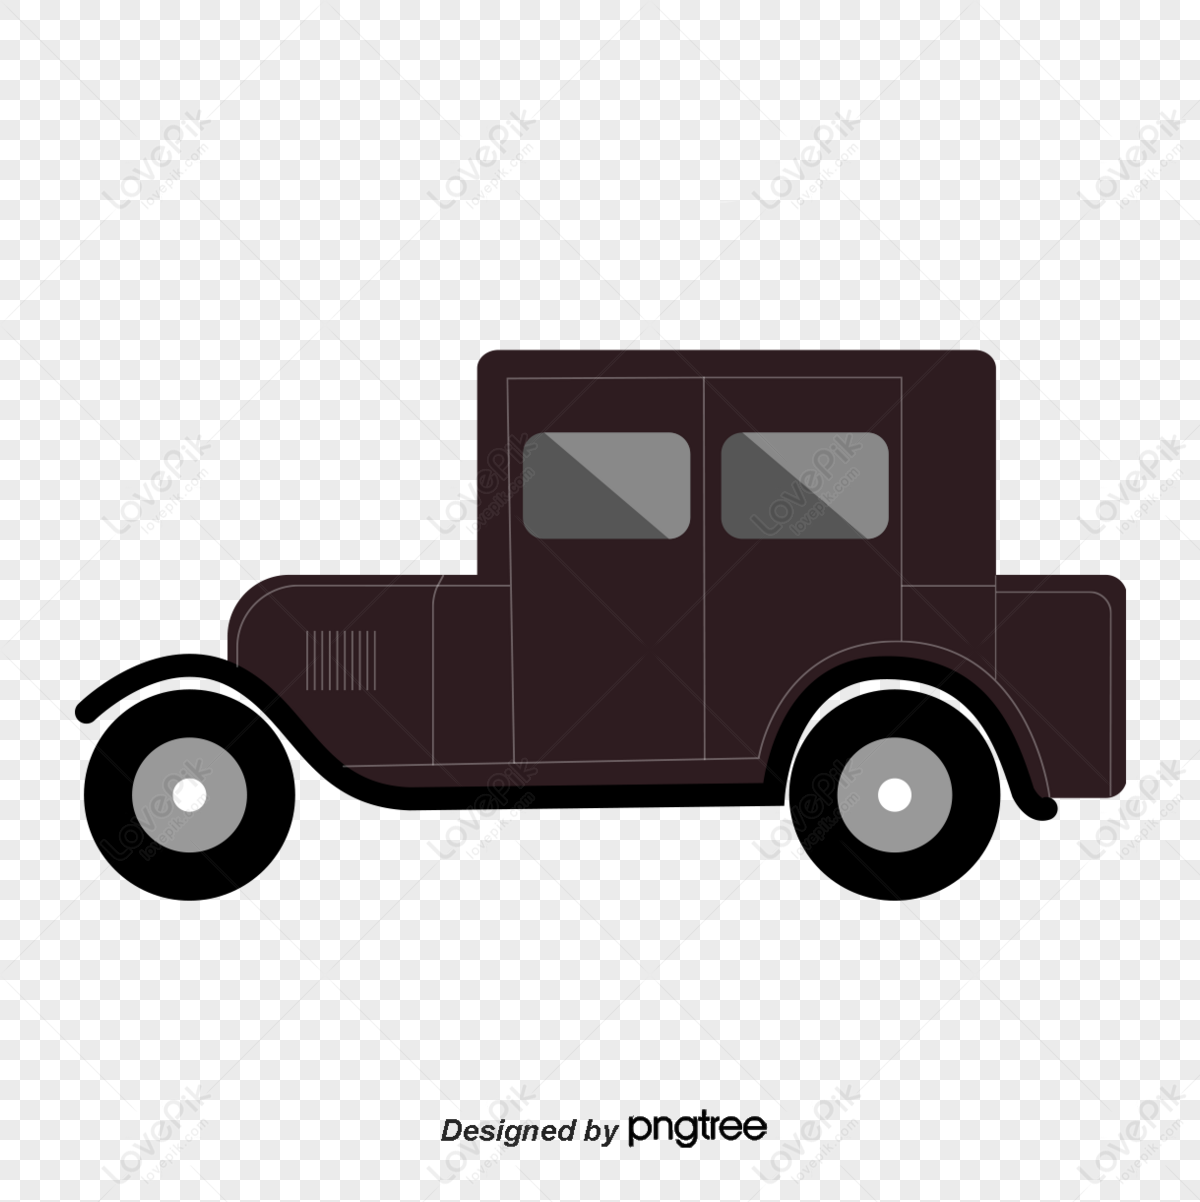 Classic Car Silhouette PNG And Vector Images Free Download - Pngtree